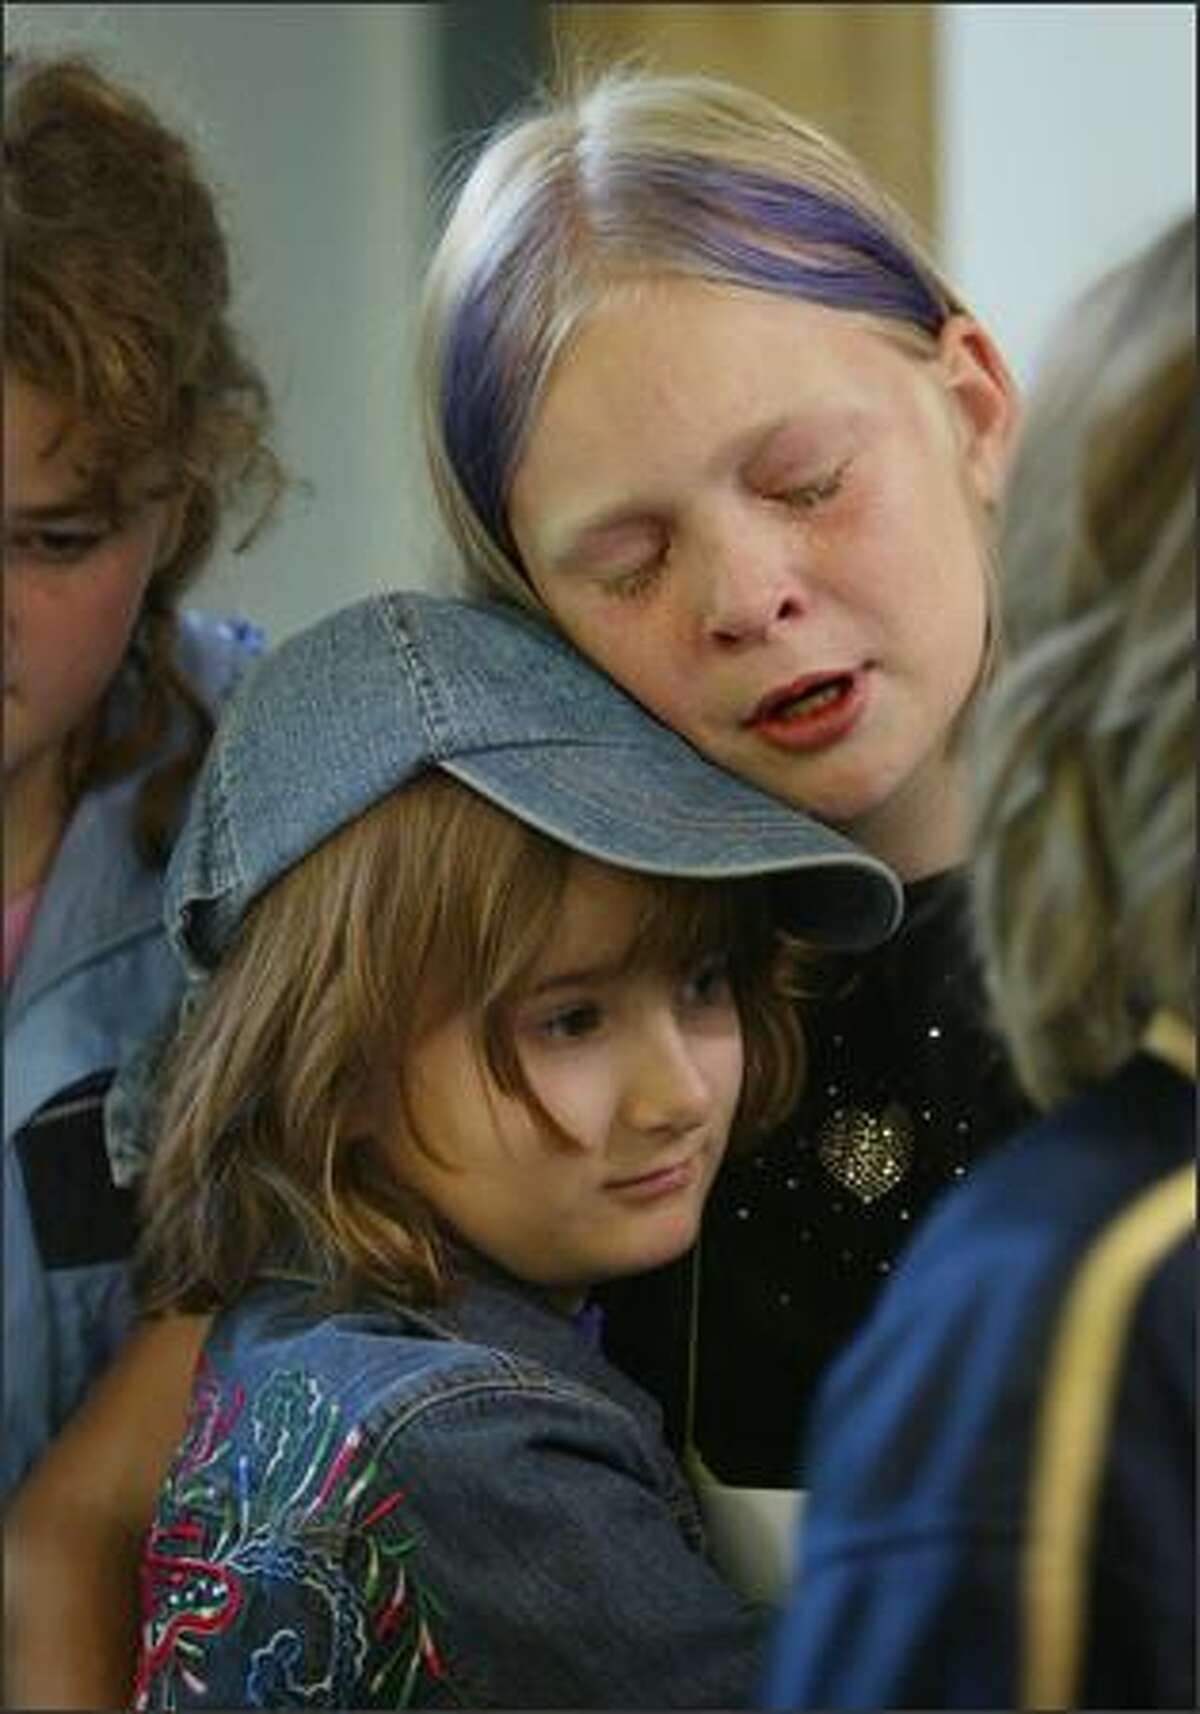 Teary-eyed over the news that Seattle's Alternative School No. 1 has been targeted for closure, Becca Mussman, a fifth-grader, hugs third-grader Ellie Preston.